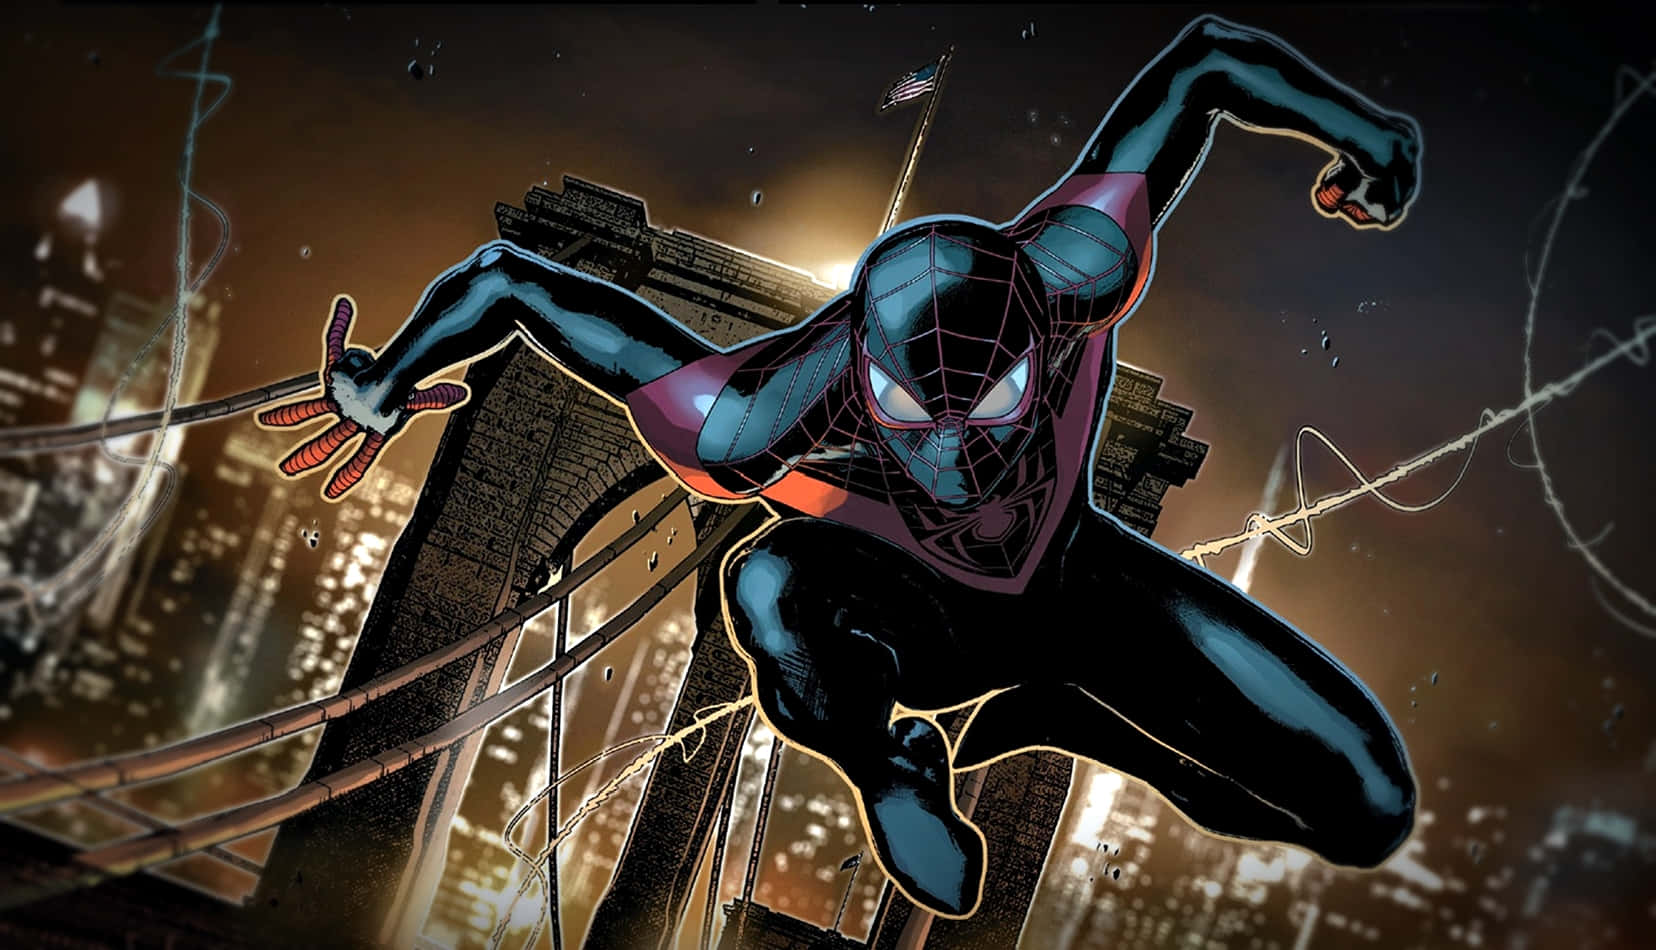 Ultimate Spider-man Swinging Through The City Background